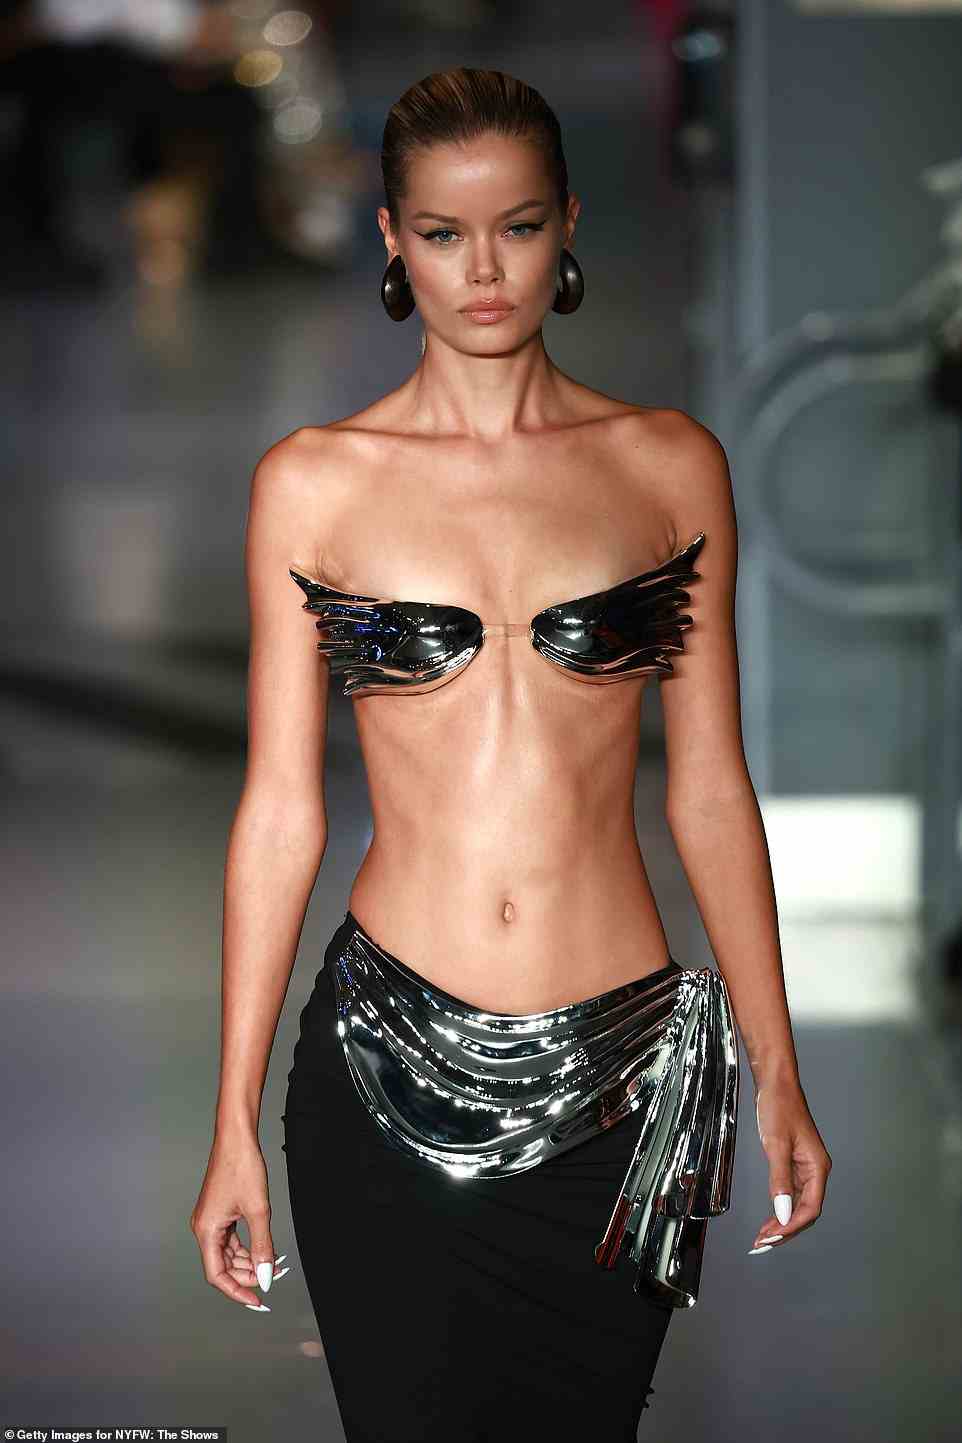 Angelic: Aasen's runway look left little to the imagination as she donned just a tiny chrome breast plate shaped like a pair of wings